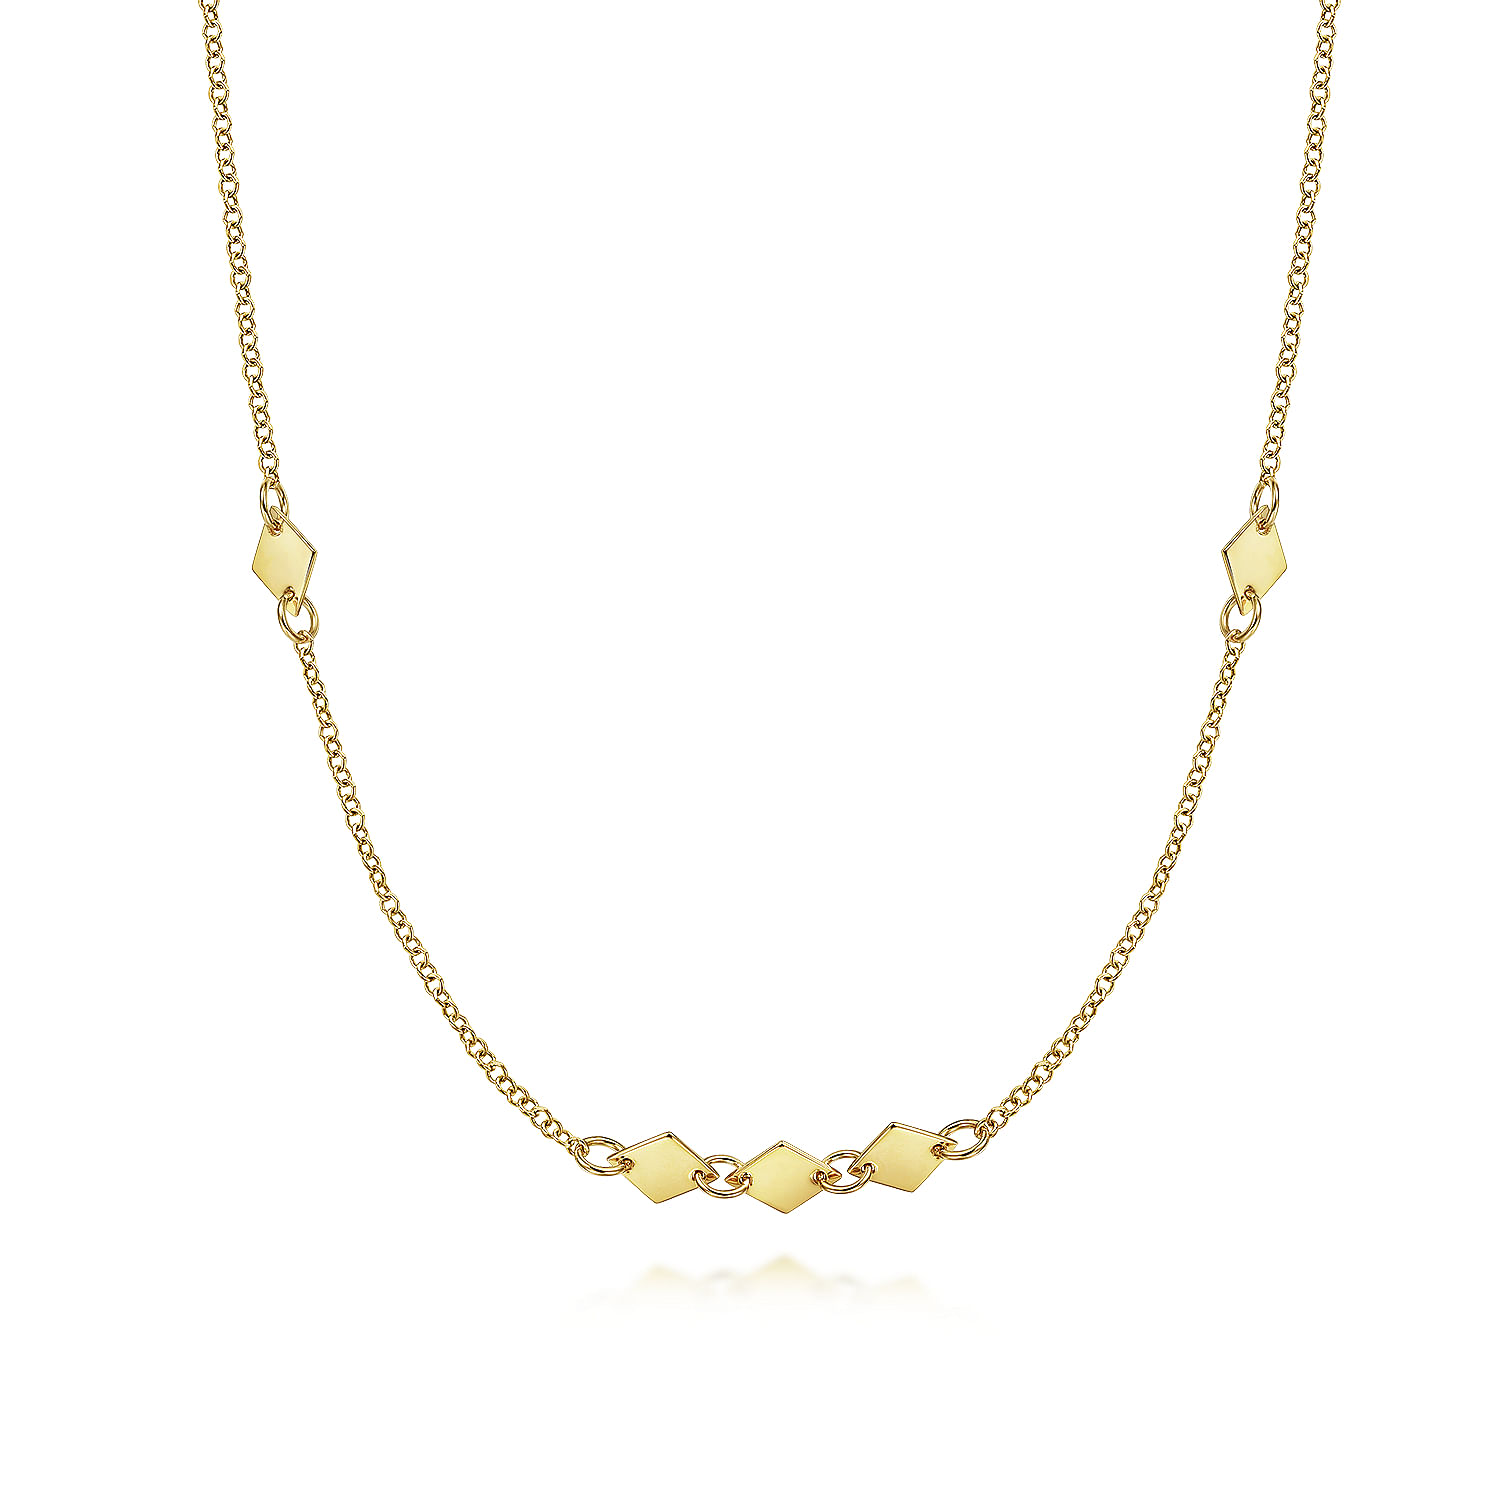 24 inch 14K Yellow Gold Diamond Shaped Disc Station Necklace